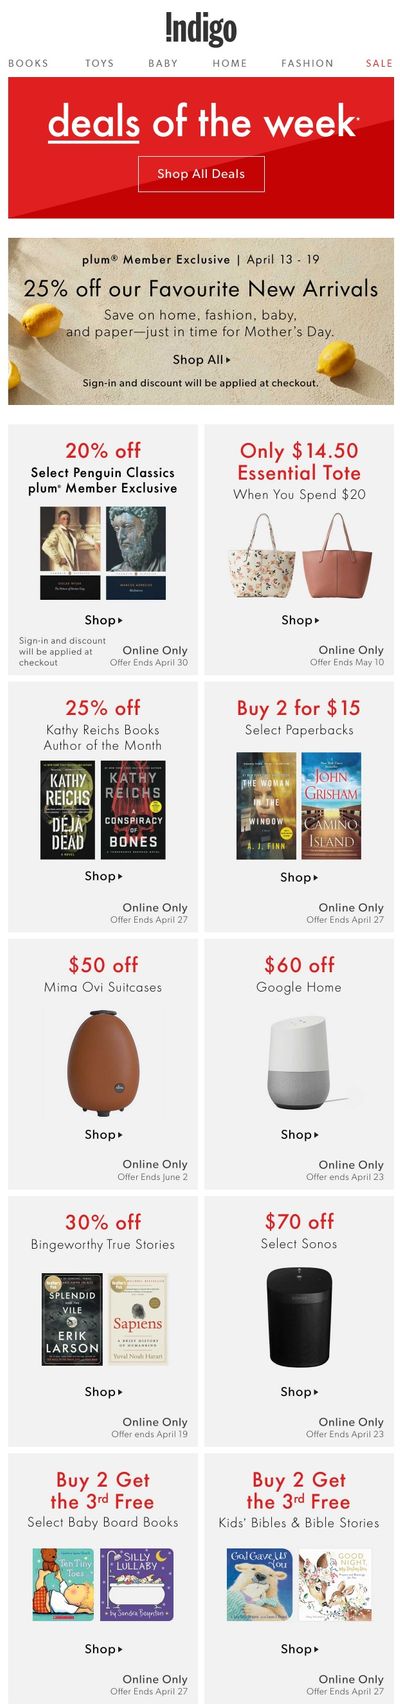 Chapters Indigo Online Deals of the Week April 13 to 19